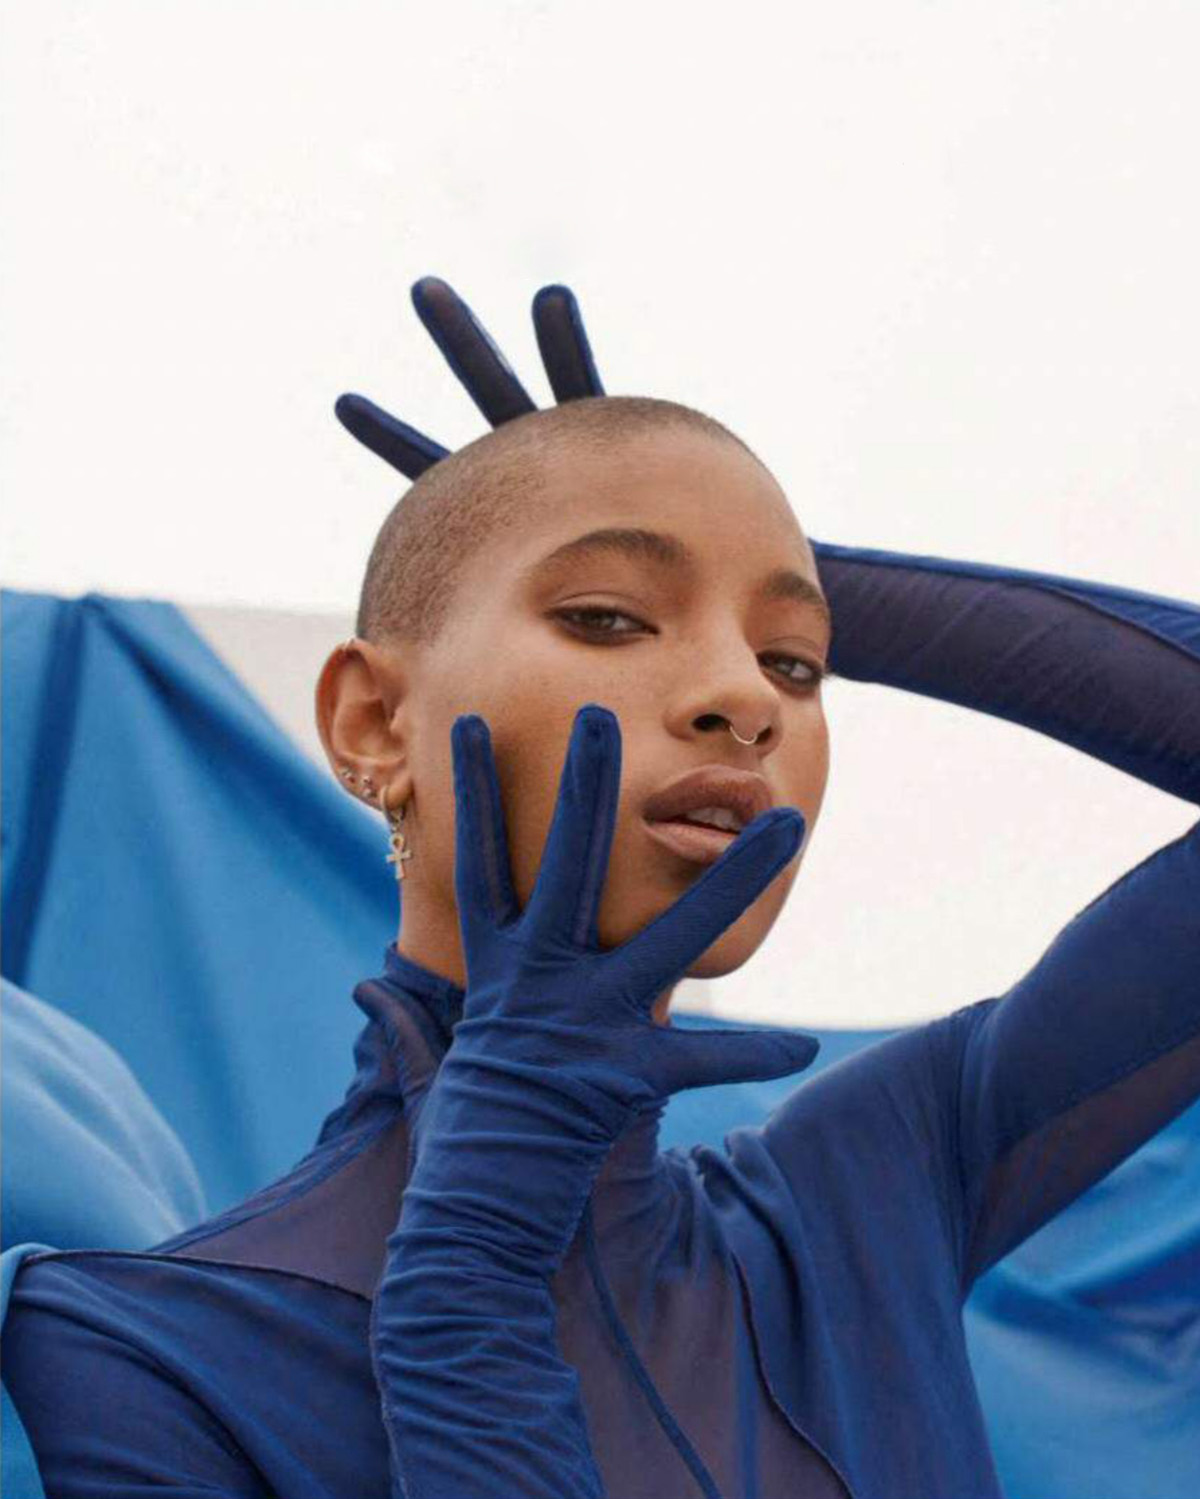 Willow Smith in Mugler on Elle France December 3rd, 2021 by Paola Kudacki